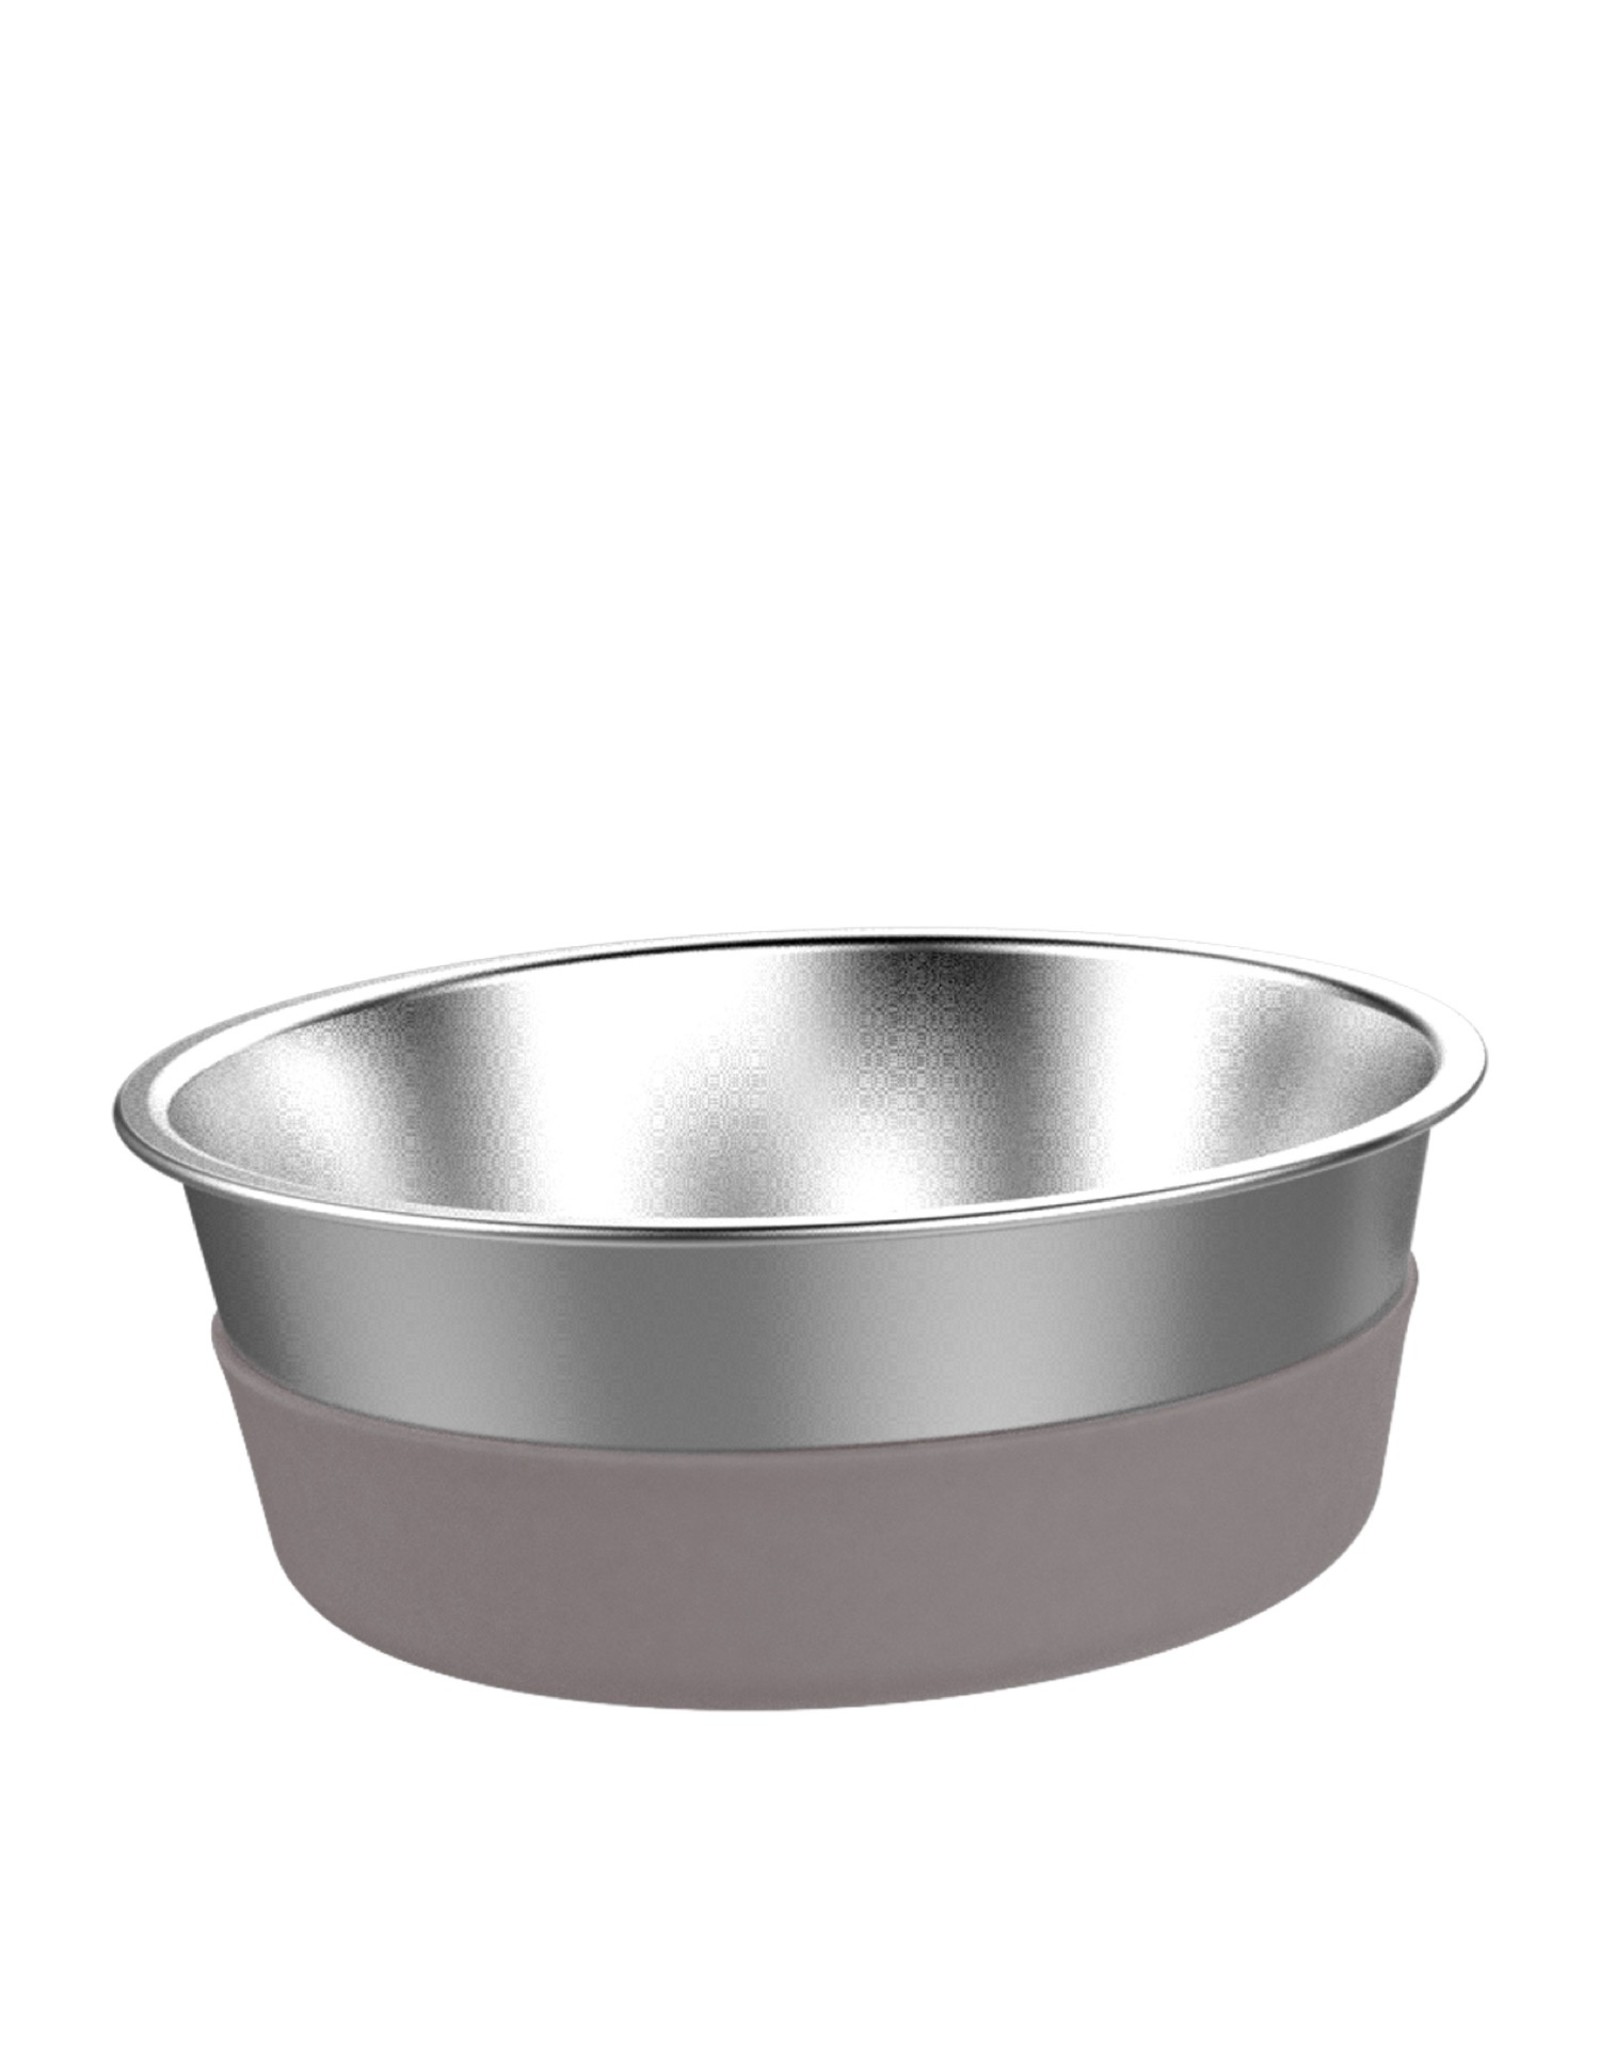 Messy Mutts MESSY MUTTS HEAVY GAUGE STAINLESS STEEL BOWL WITH NON-SLIP REMOVABLE SILICONE BASE